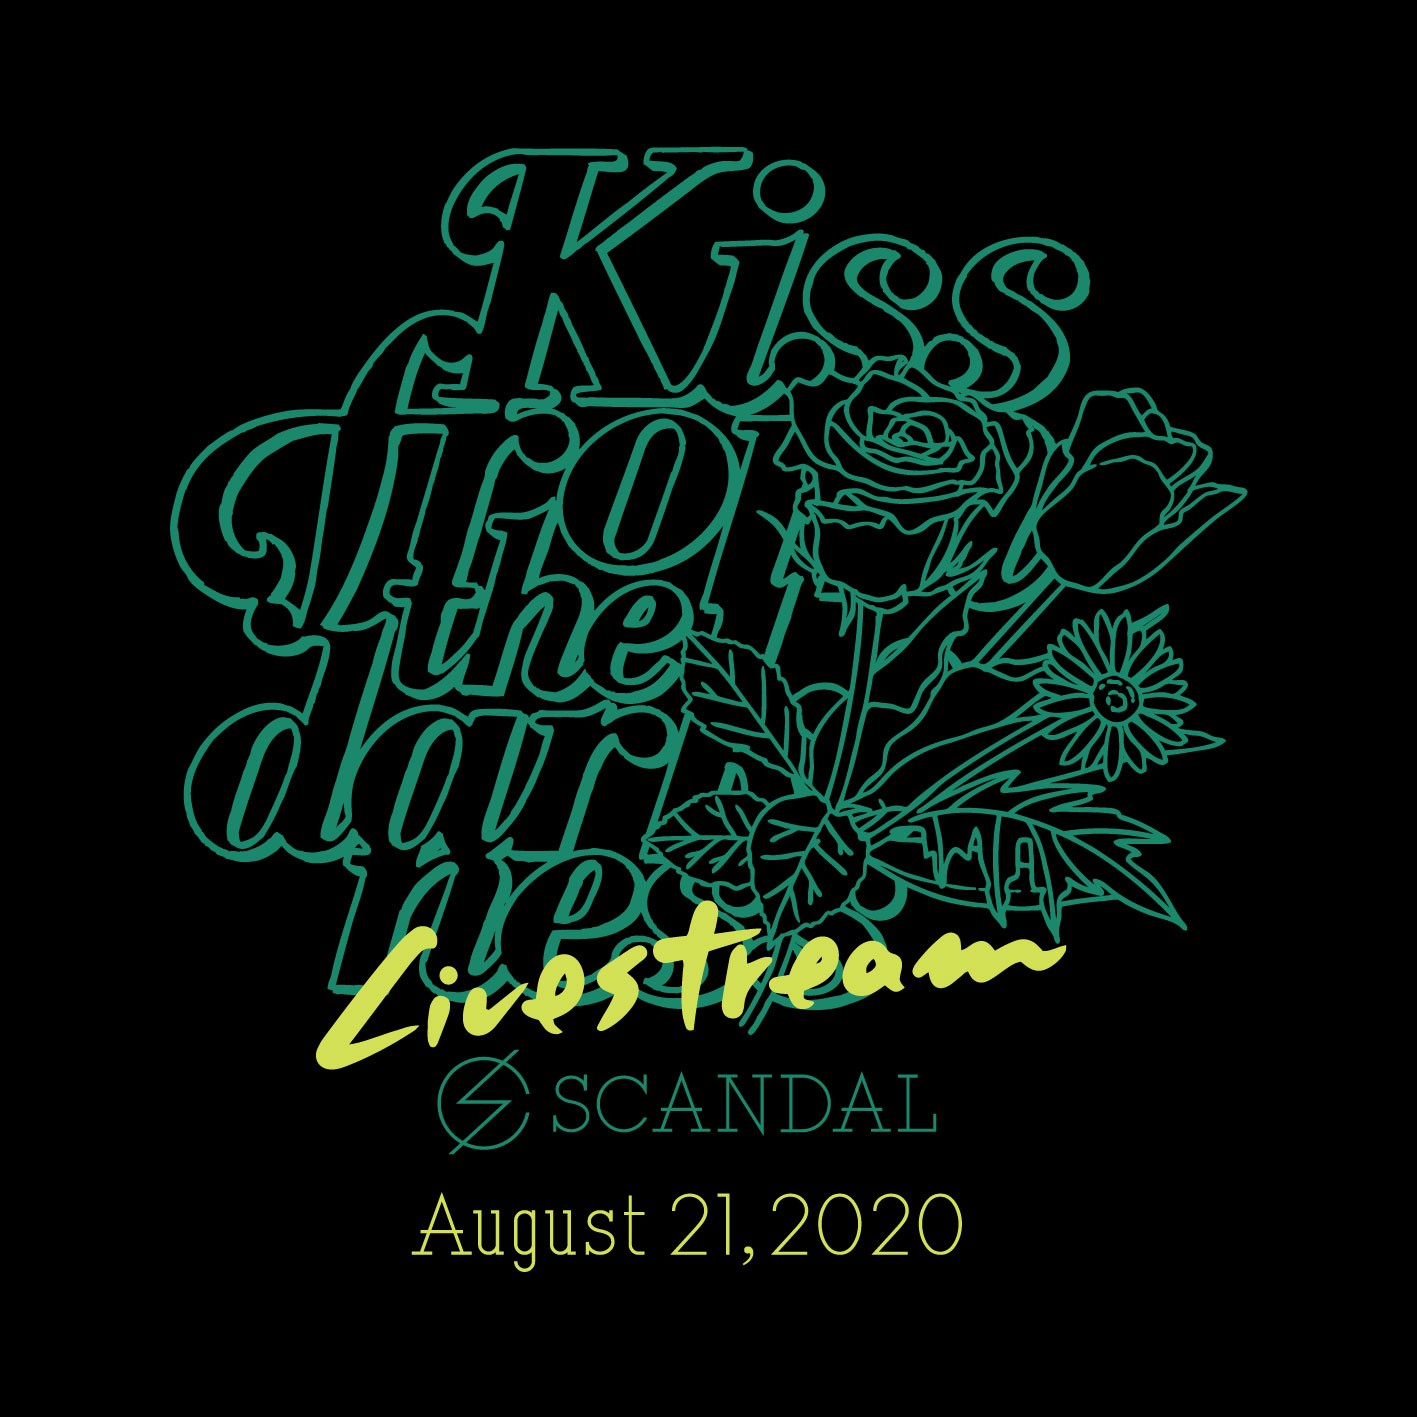 SCANDAL – SCANDAL WORLD TOUR 2020 “Kiss from the darkness” Livestream [MP4 1080p / WEB] [2020.8.21]